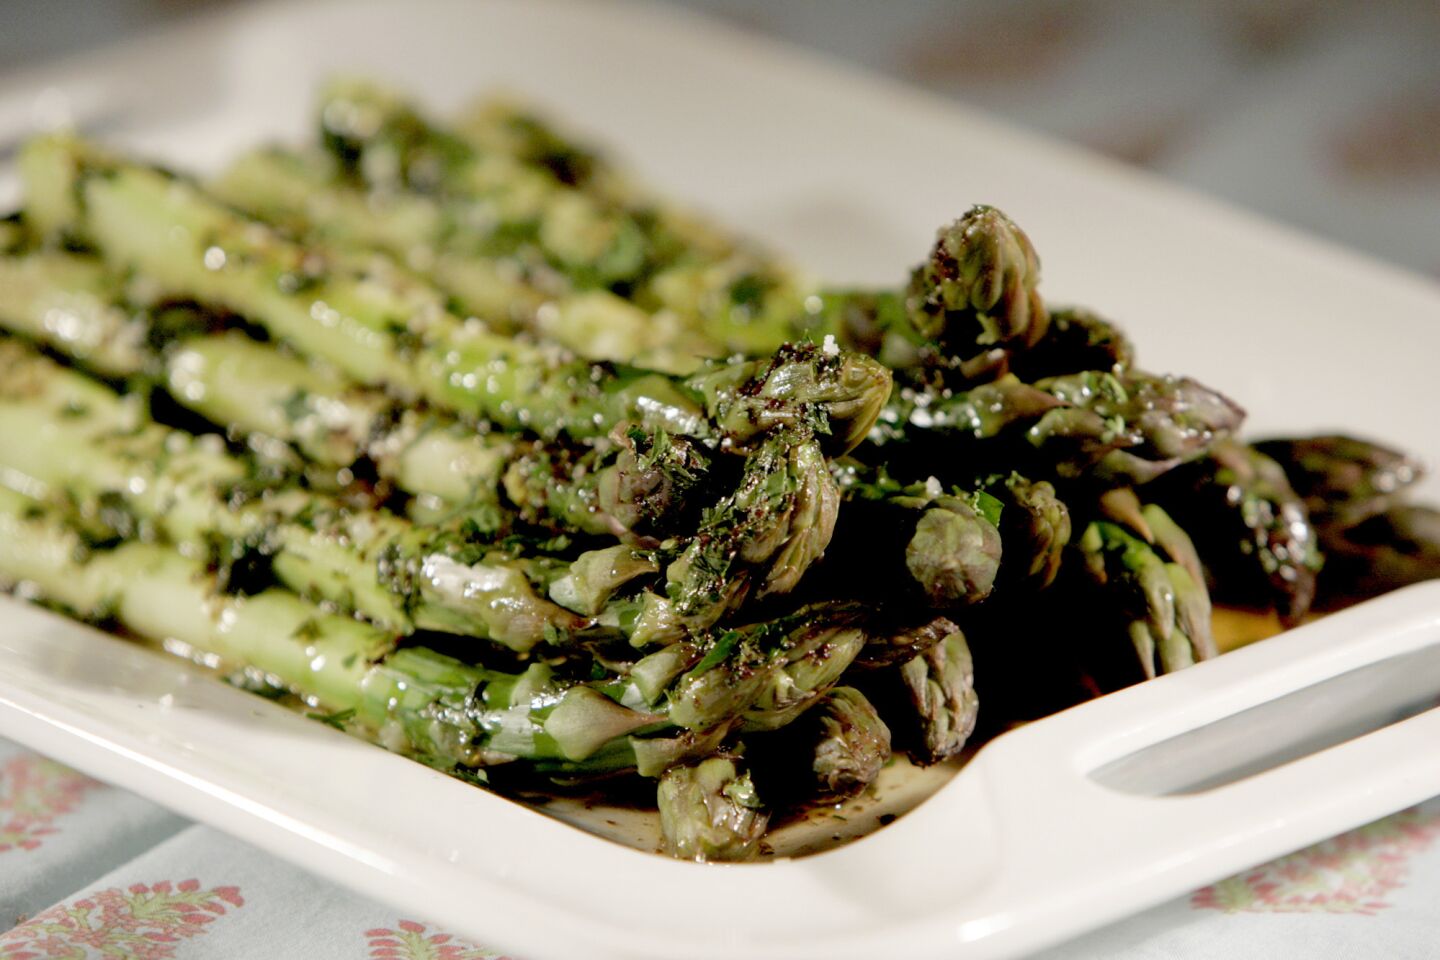 Steamed asparagus with brown butter sauce